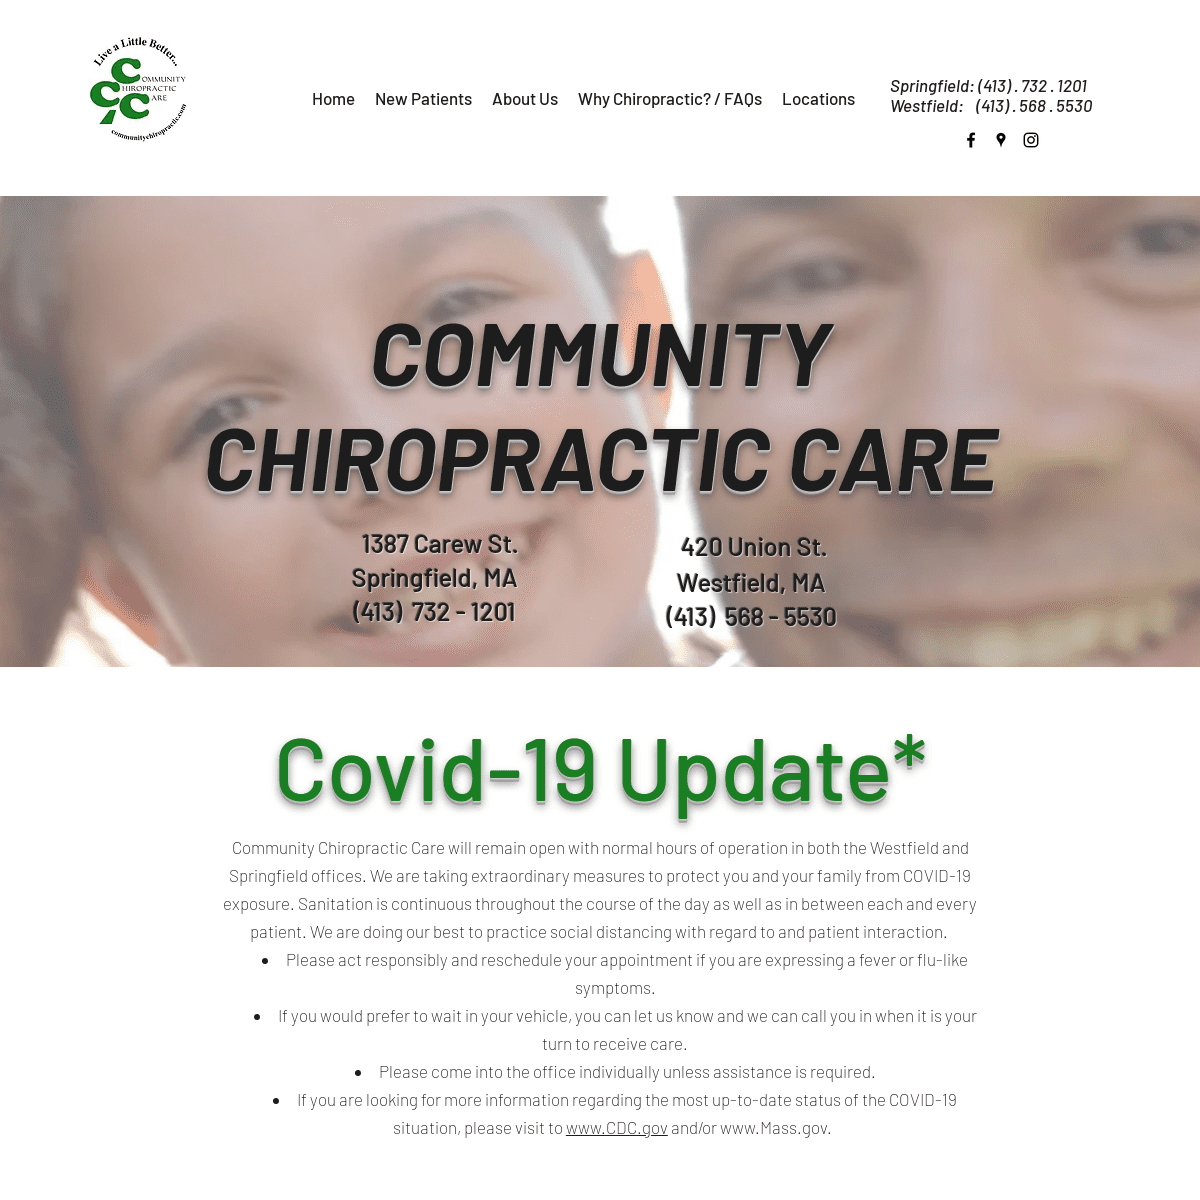 A complete backup of https://communitychiropractic.com